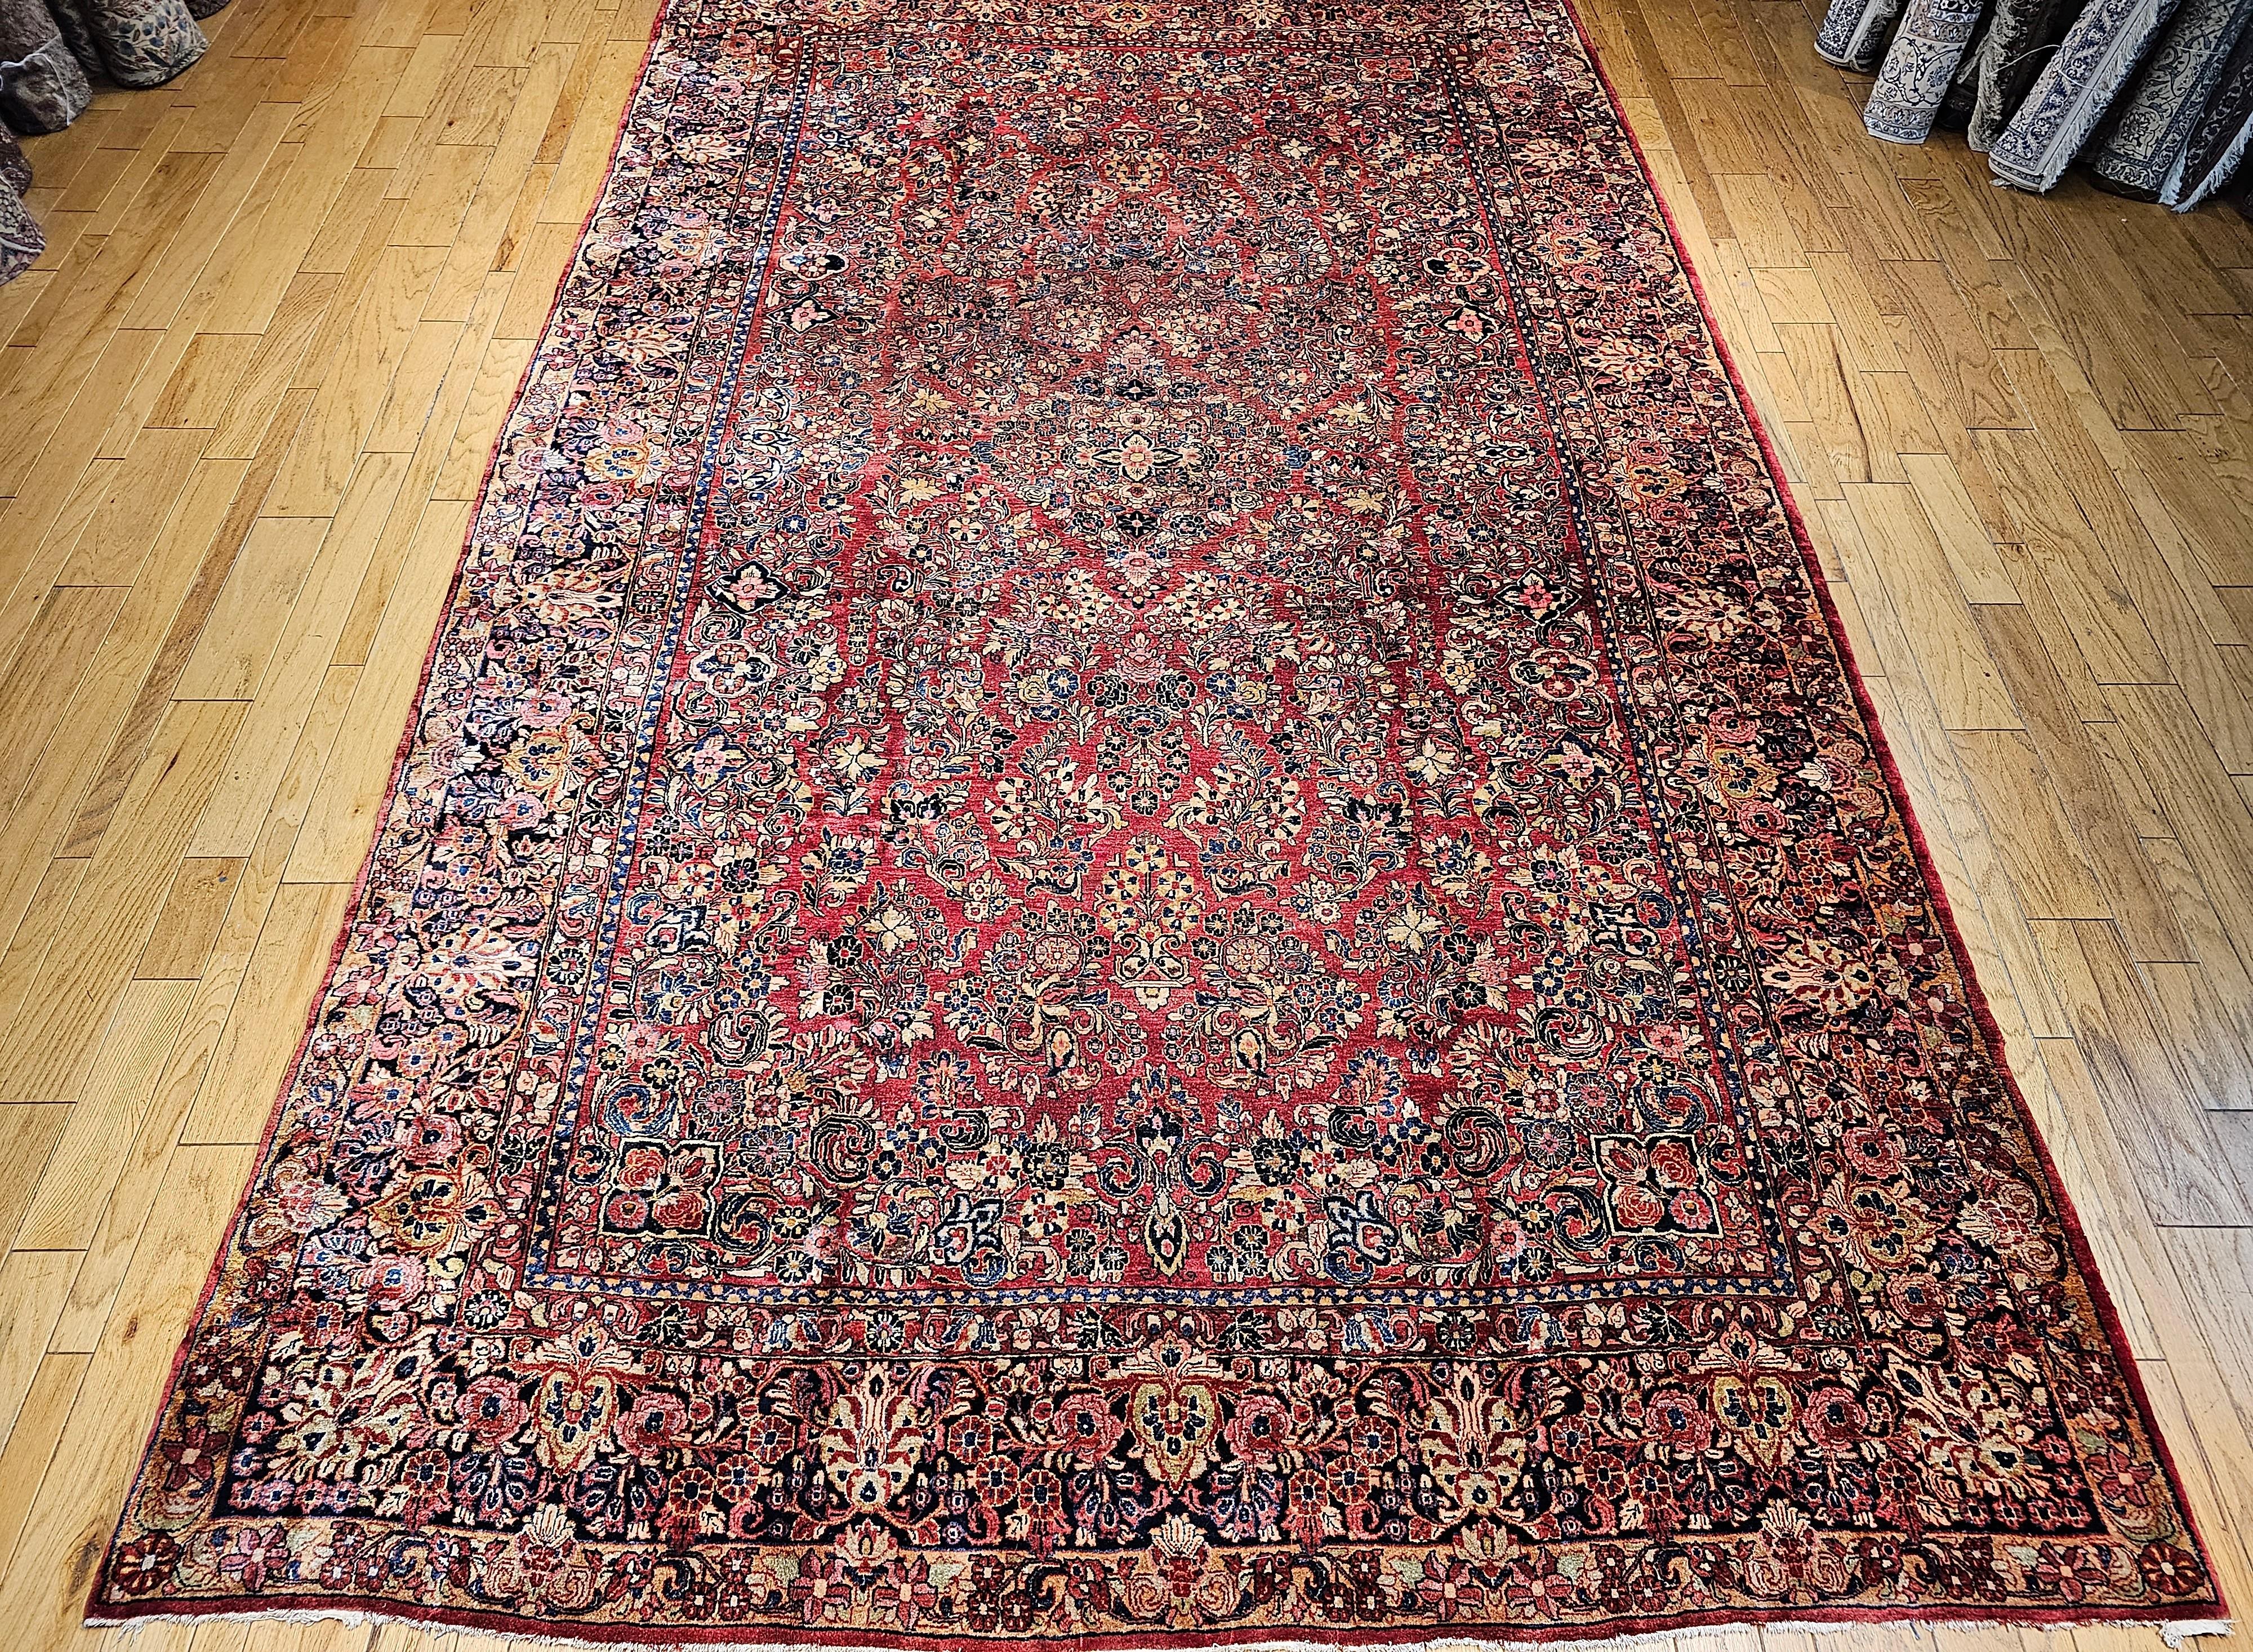 Vintage oversized Persian Sarouk  has an all-over pattern consisting of large flower bouquets in red with a dark blue border also filled with flower bouquets.  The Sarouk rugs have the flower bouquet and vase design mostly in a dark red background